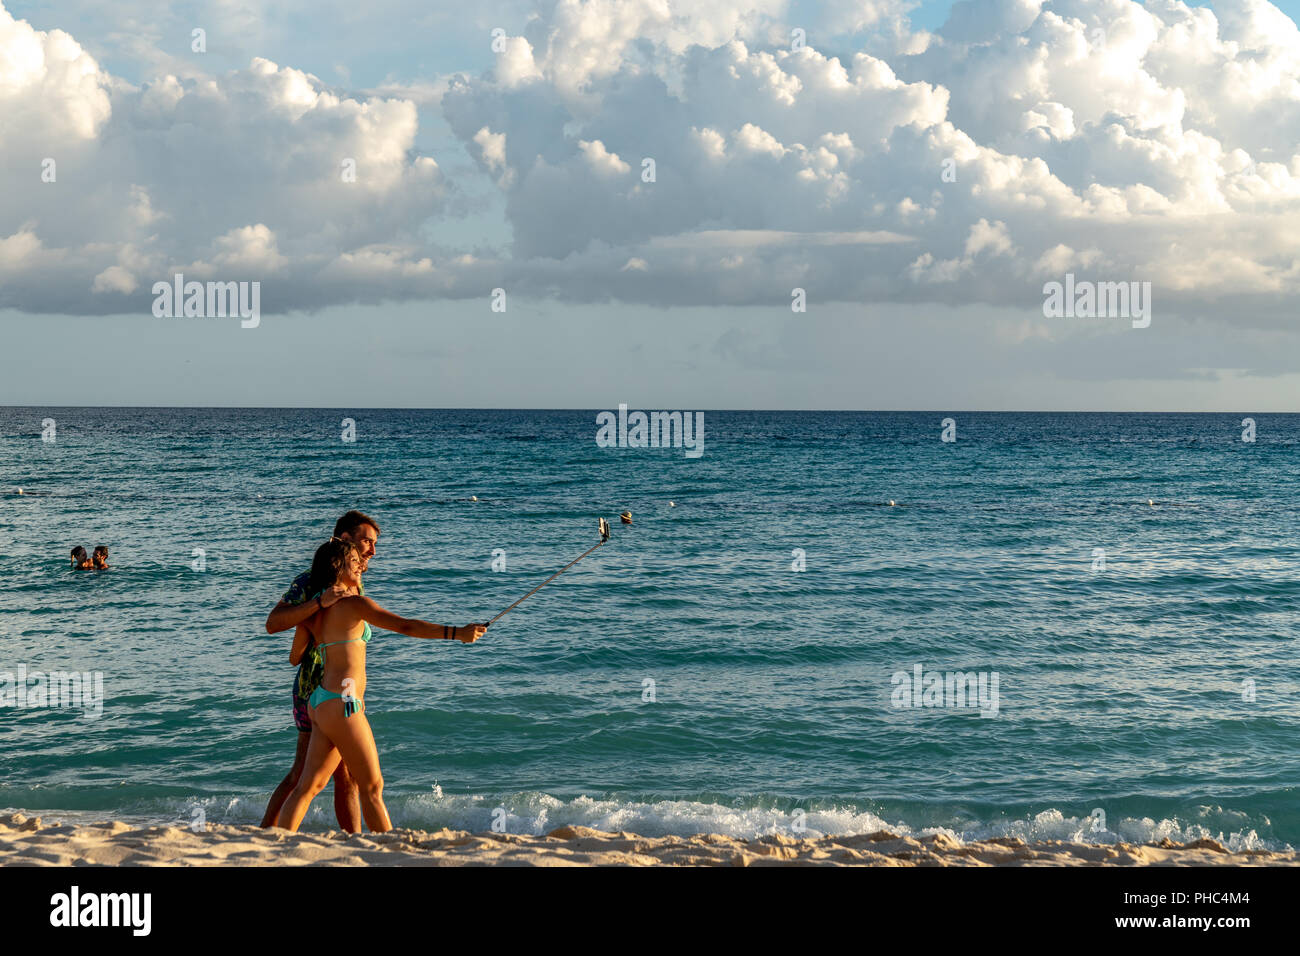 Bayahibe, Dominican Republic, 26 August 2018. A couple takes a selfie as they walk in the beach at a Caribbean resort in Dominican Republic. Photo by  Stock Photo